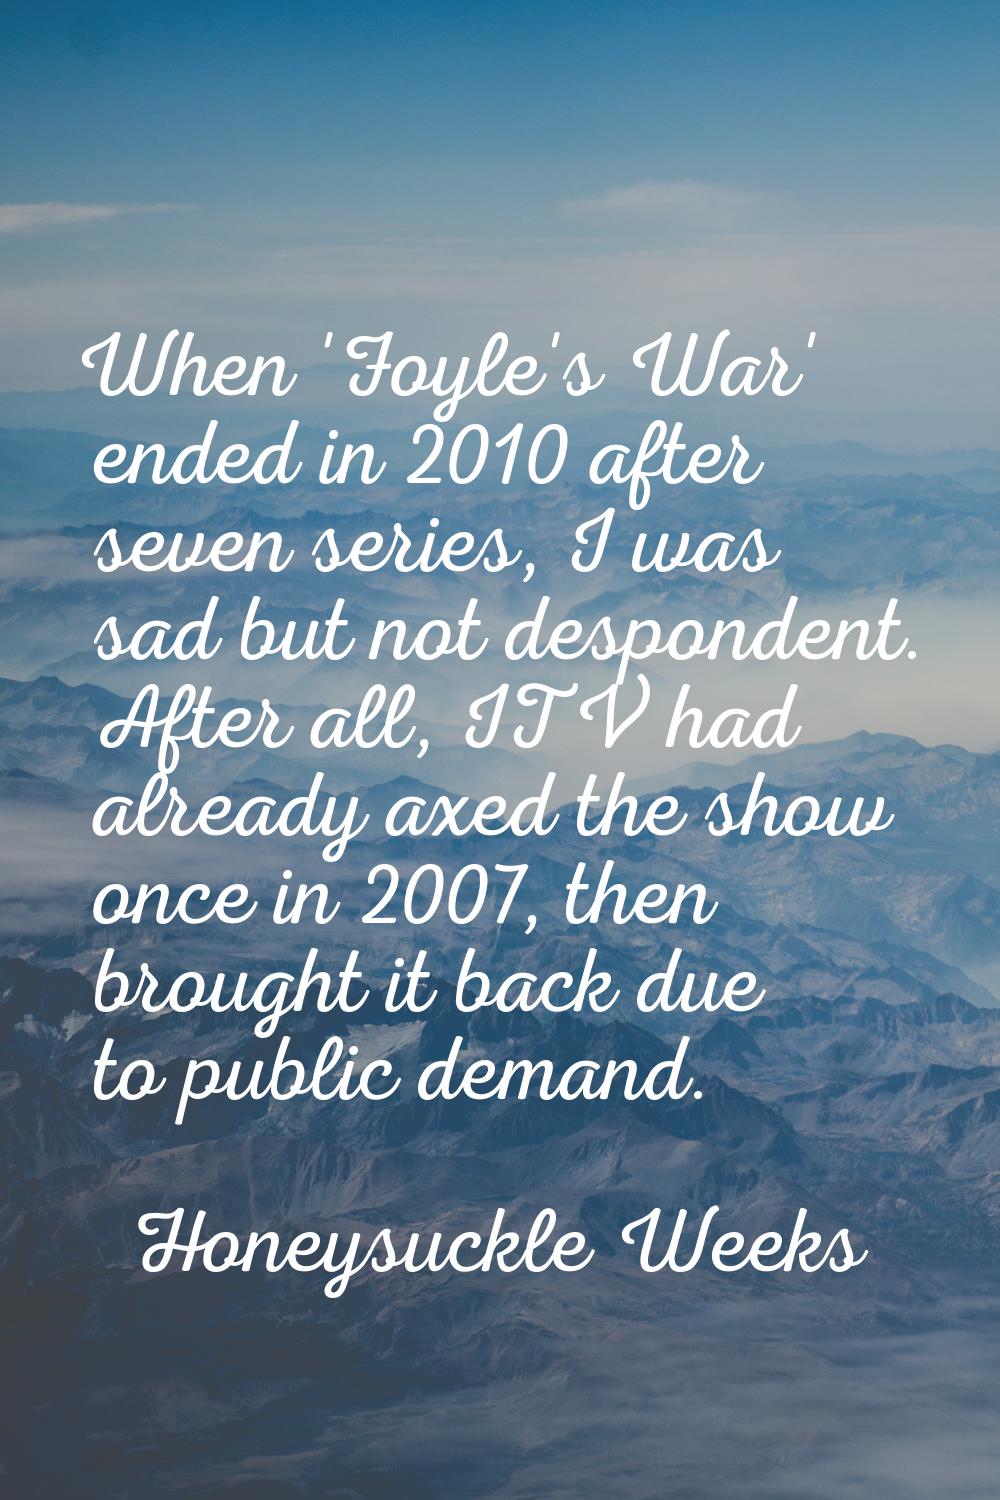 When 'Foyle's War' ended in 2010 after seven series, I was sad but not despondent. After all, ITV h